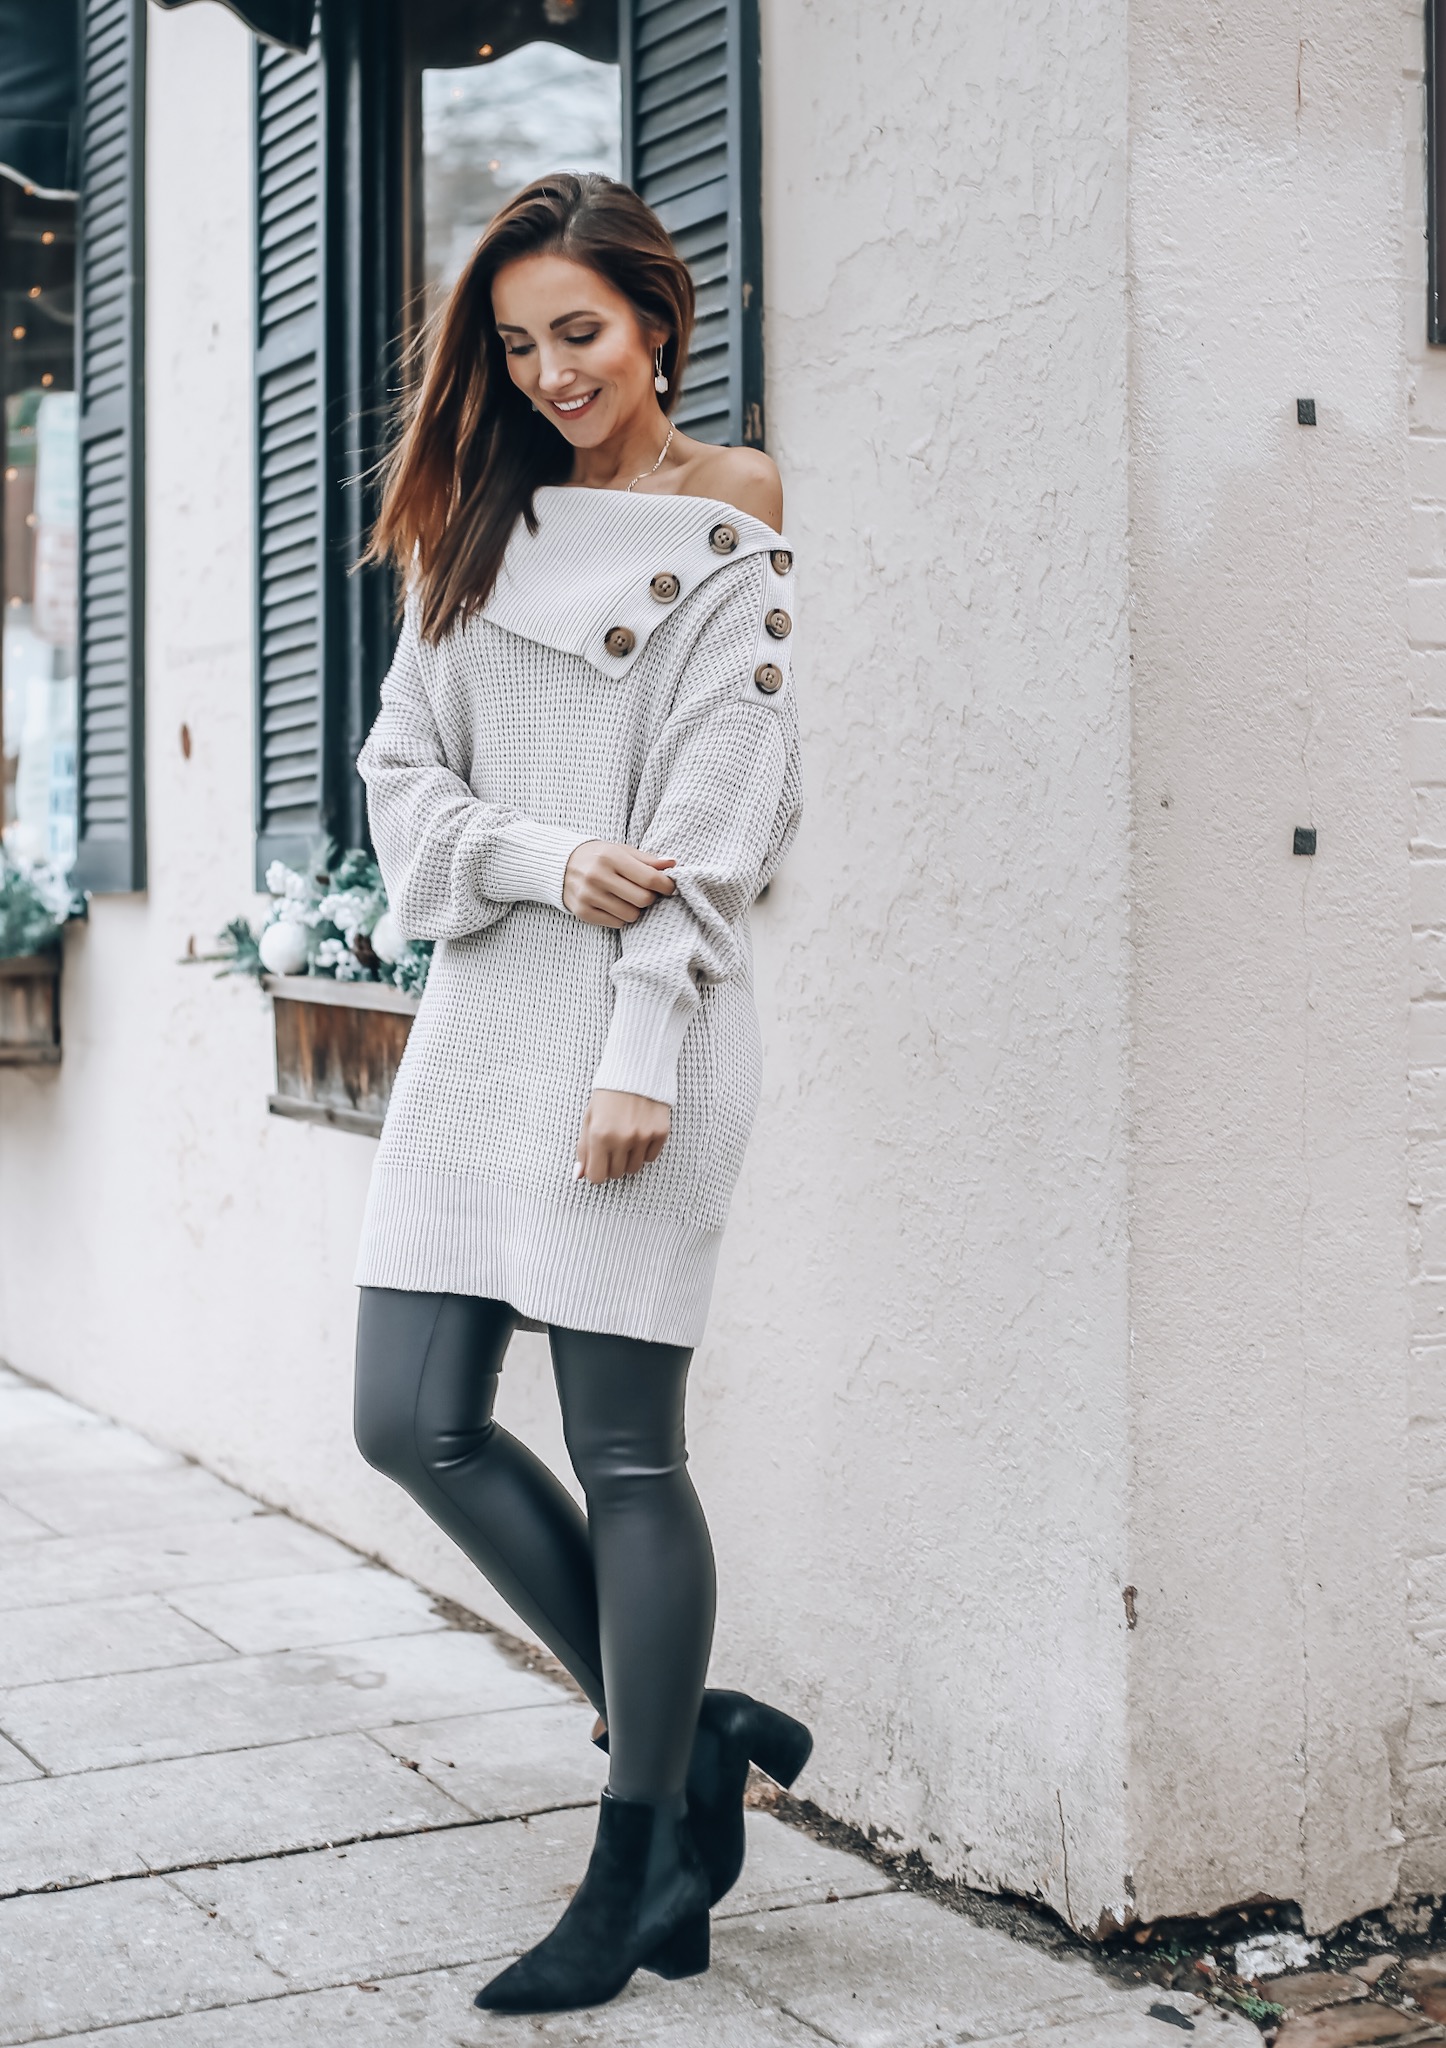 Tunic sweater with buttons, Vegan Leather Leggings